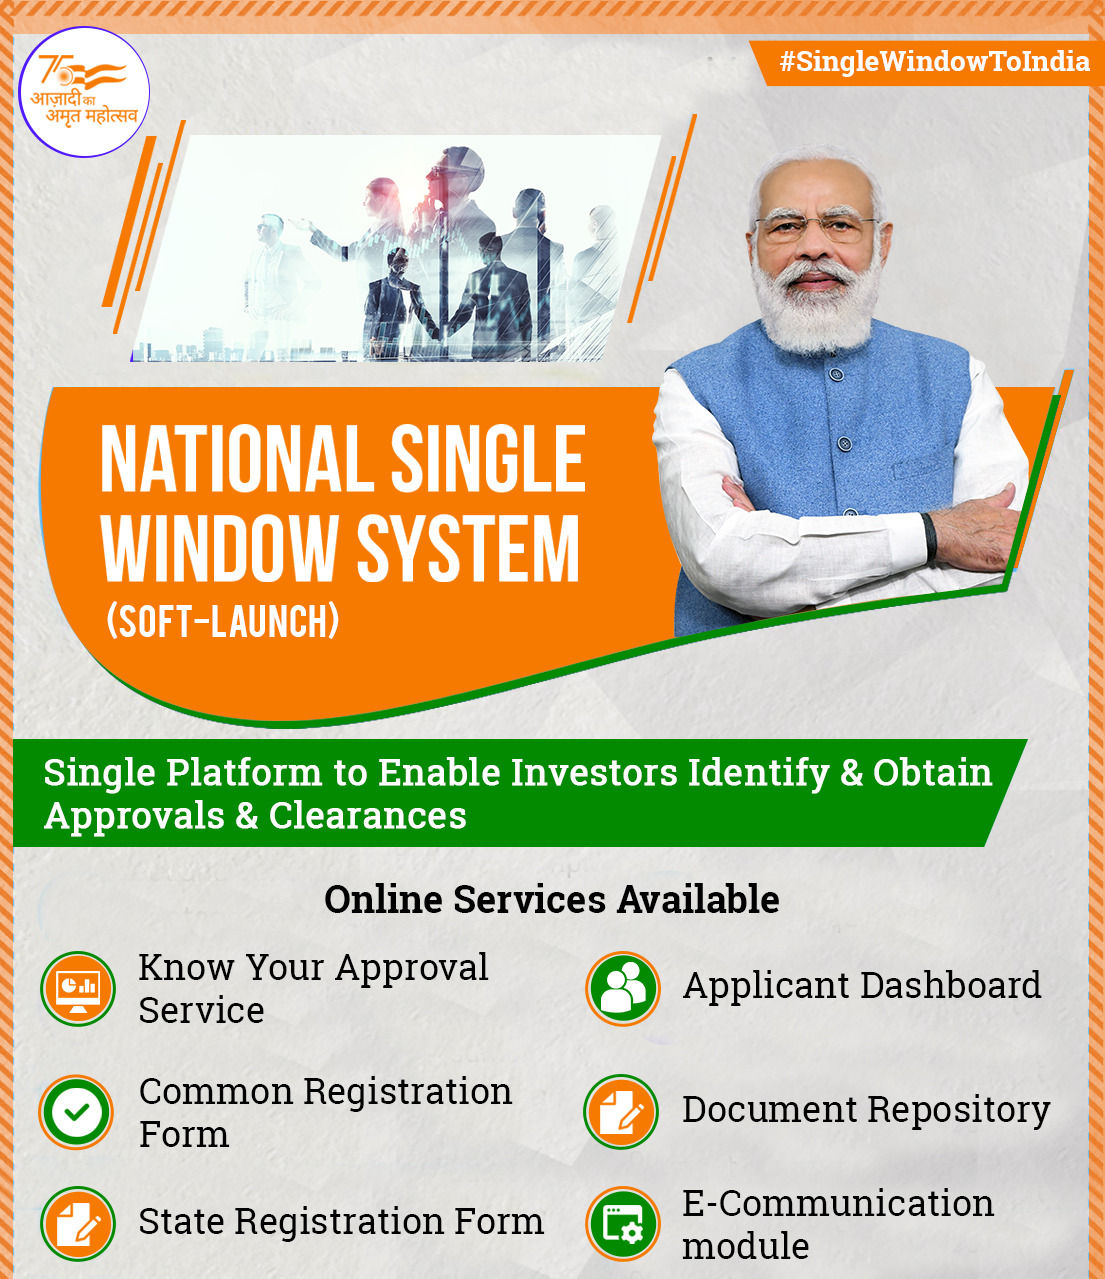 What is India’s National Single Window System?